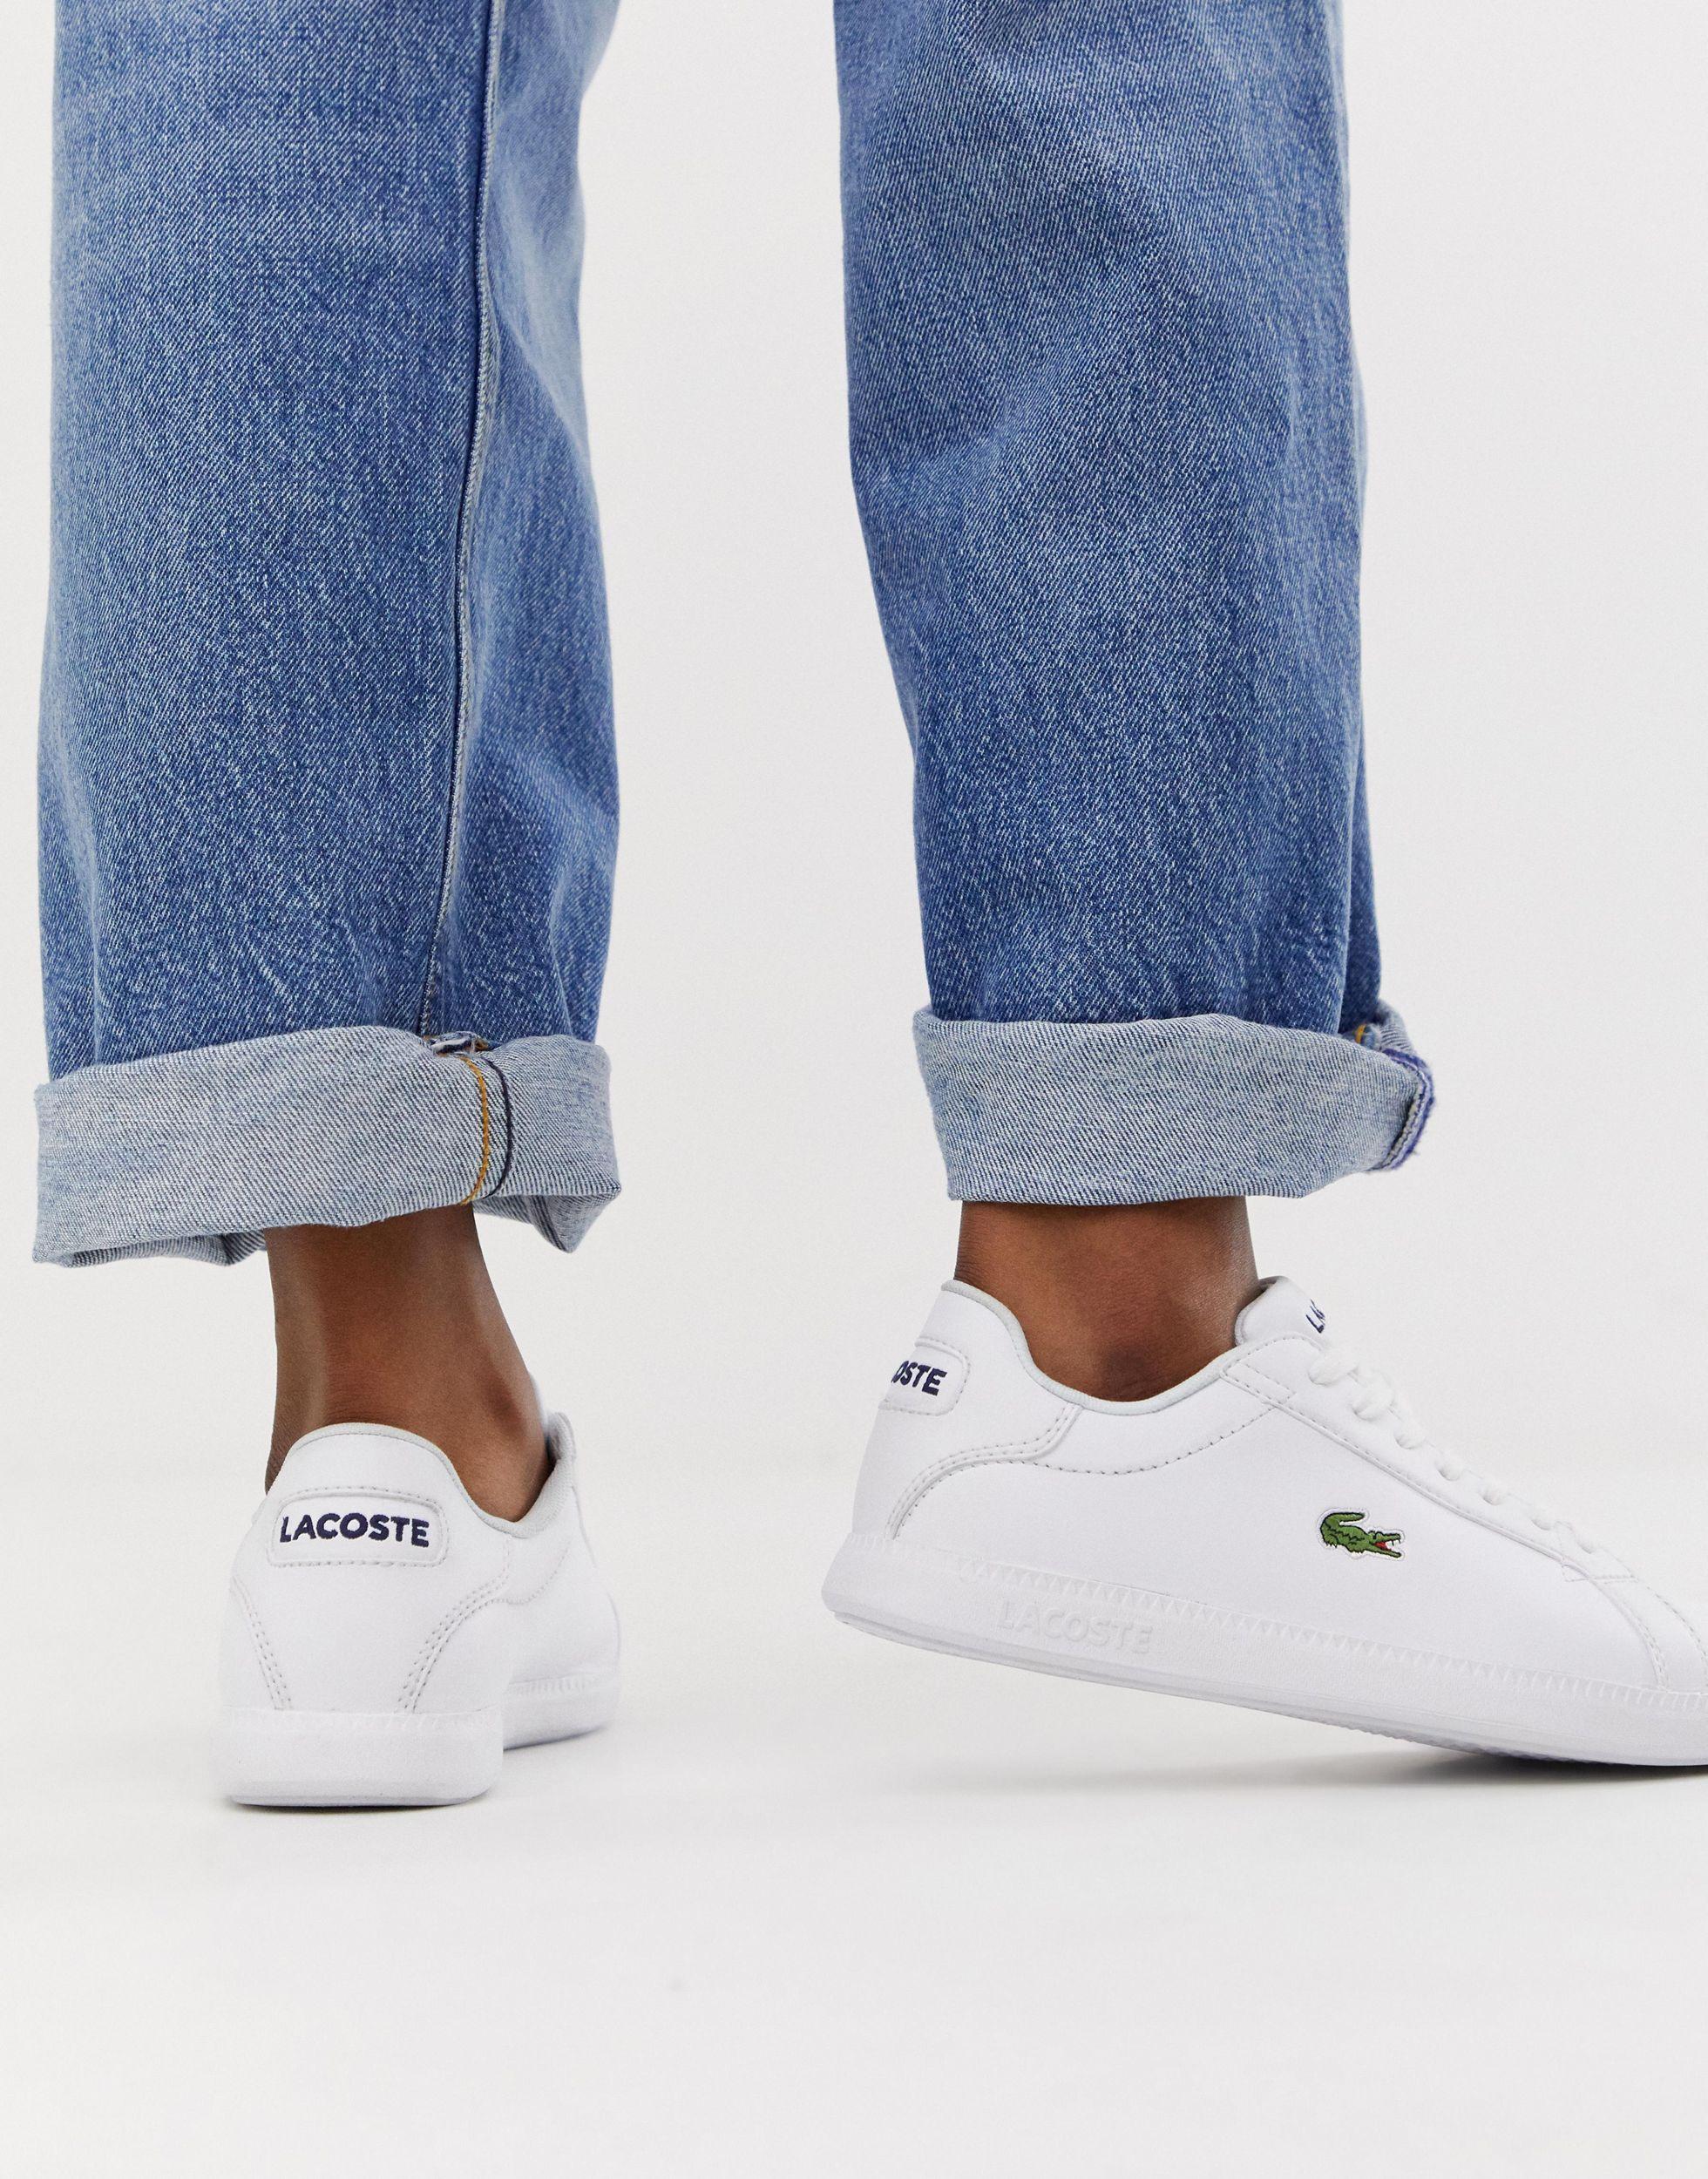 Lacoste Straightset Bl1 Spw Trainers in White - Save 44% | Lyst